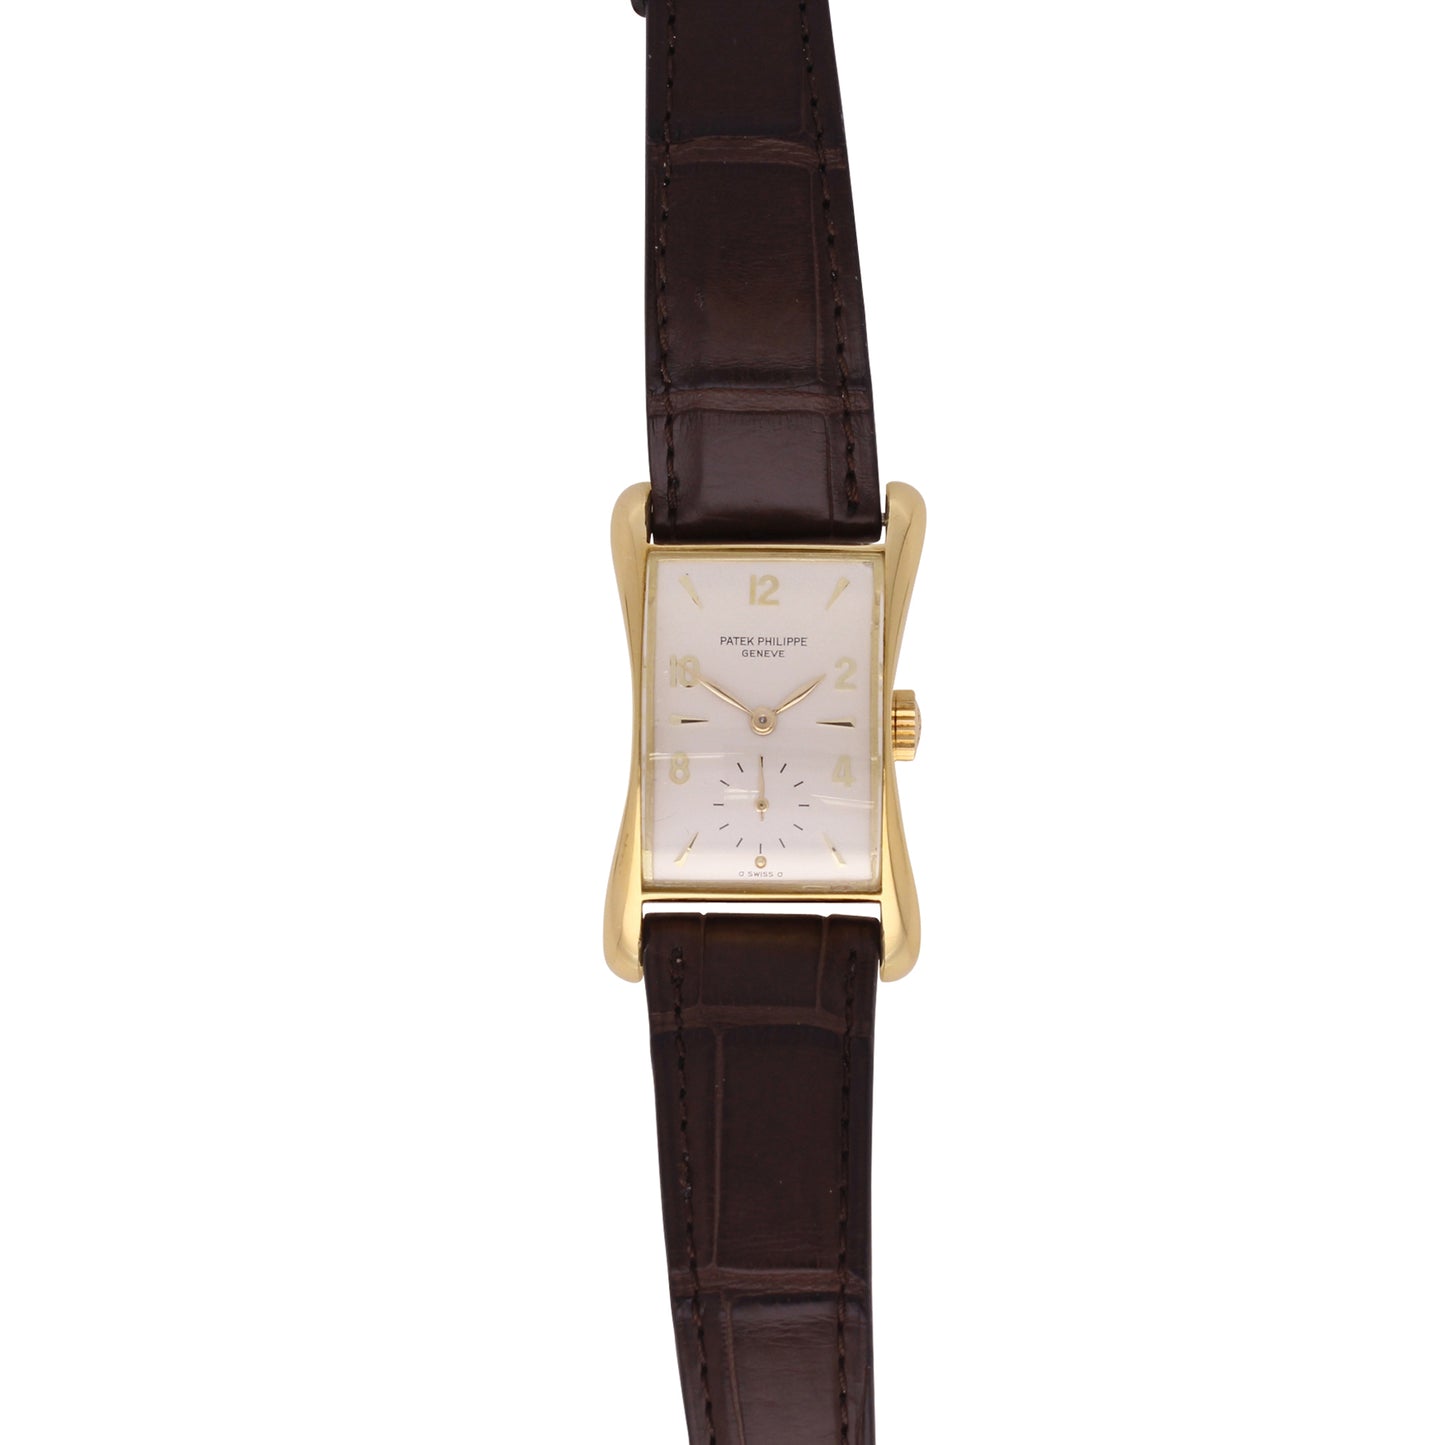 18ct yellow gold, reference 2442 "Marilyn Monroe" wristwatch. Made 1953